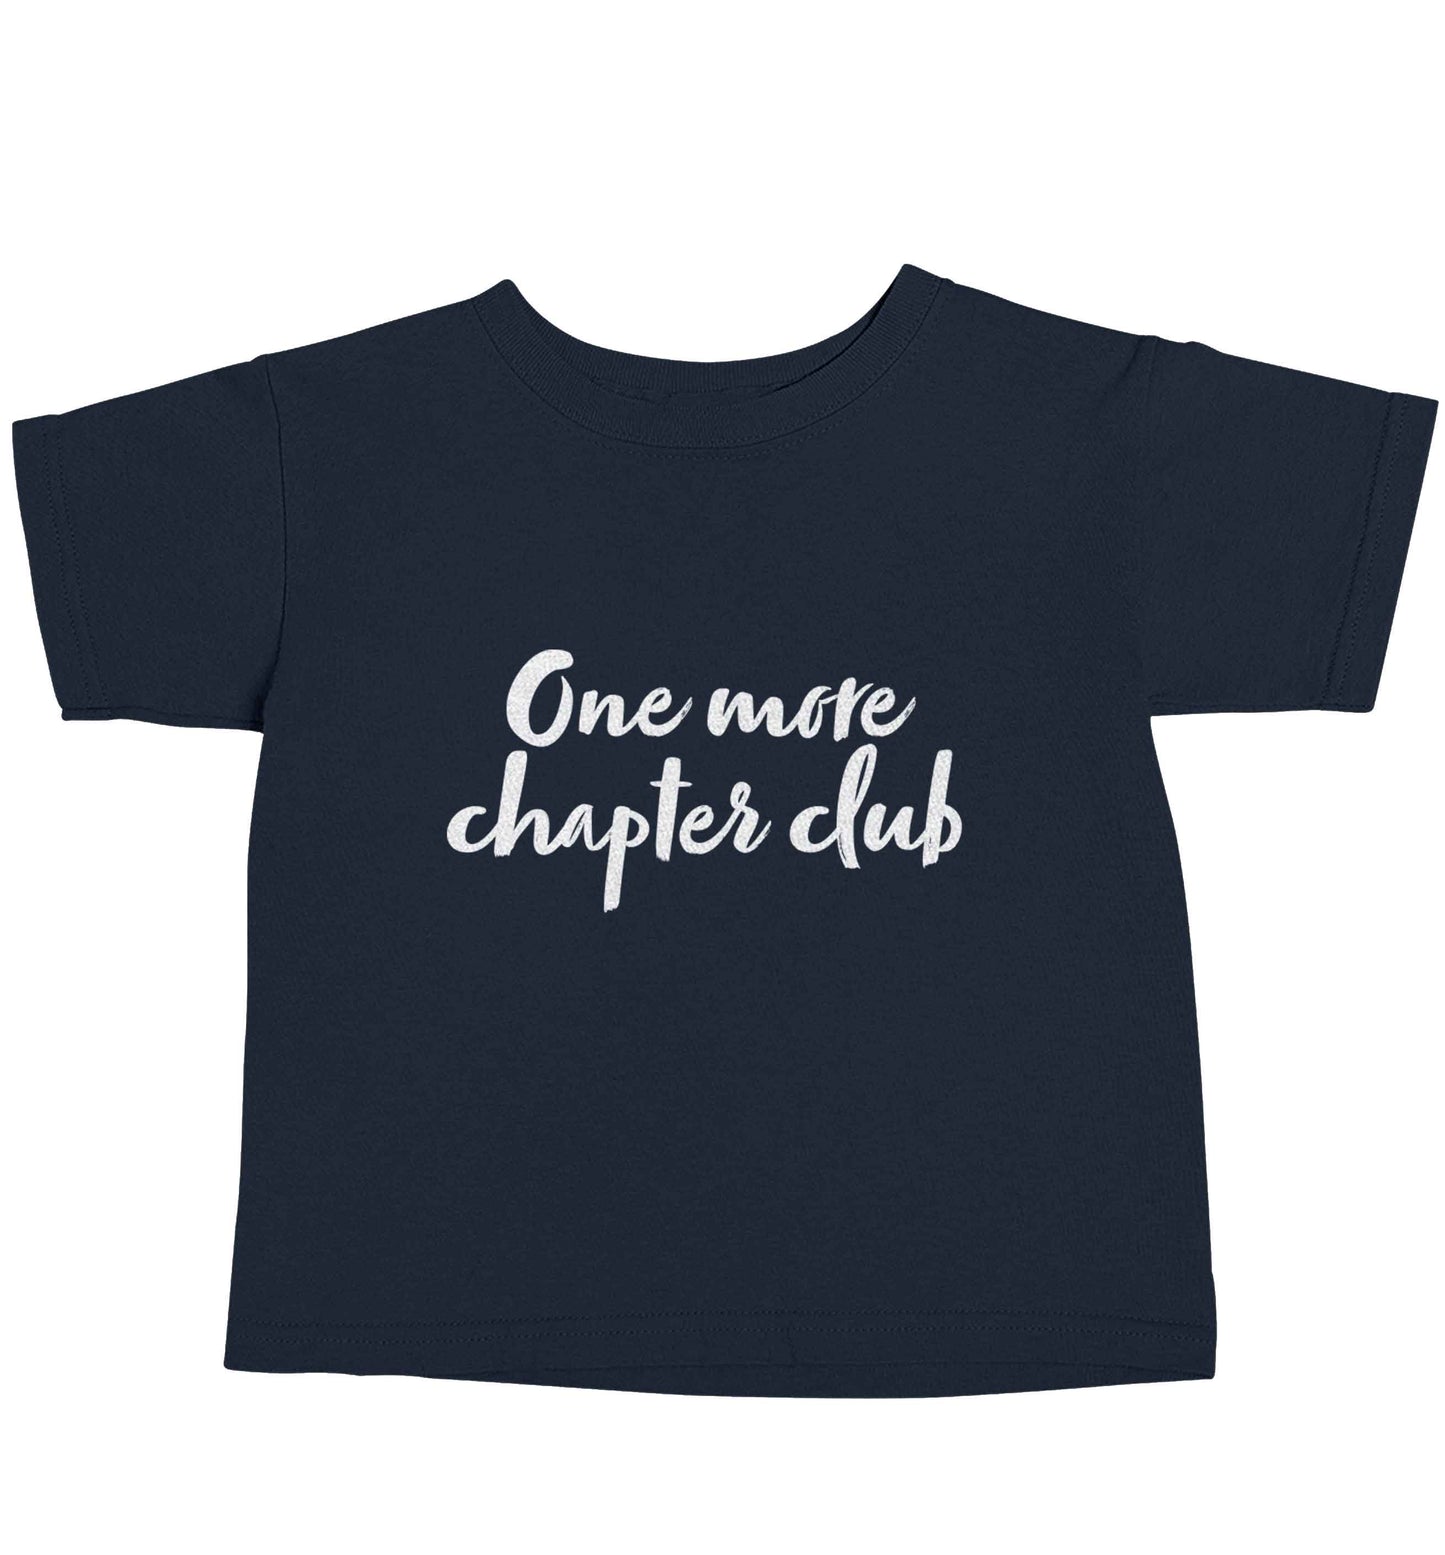 One more chapter club Kit navy baby toddler Tshirt 2 Years